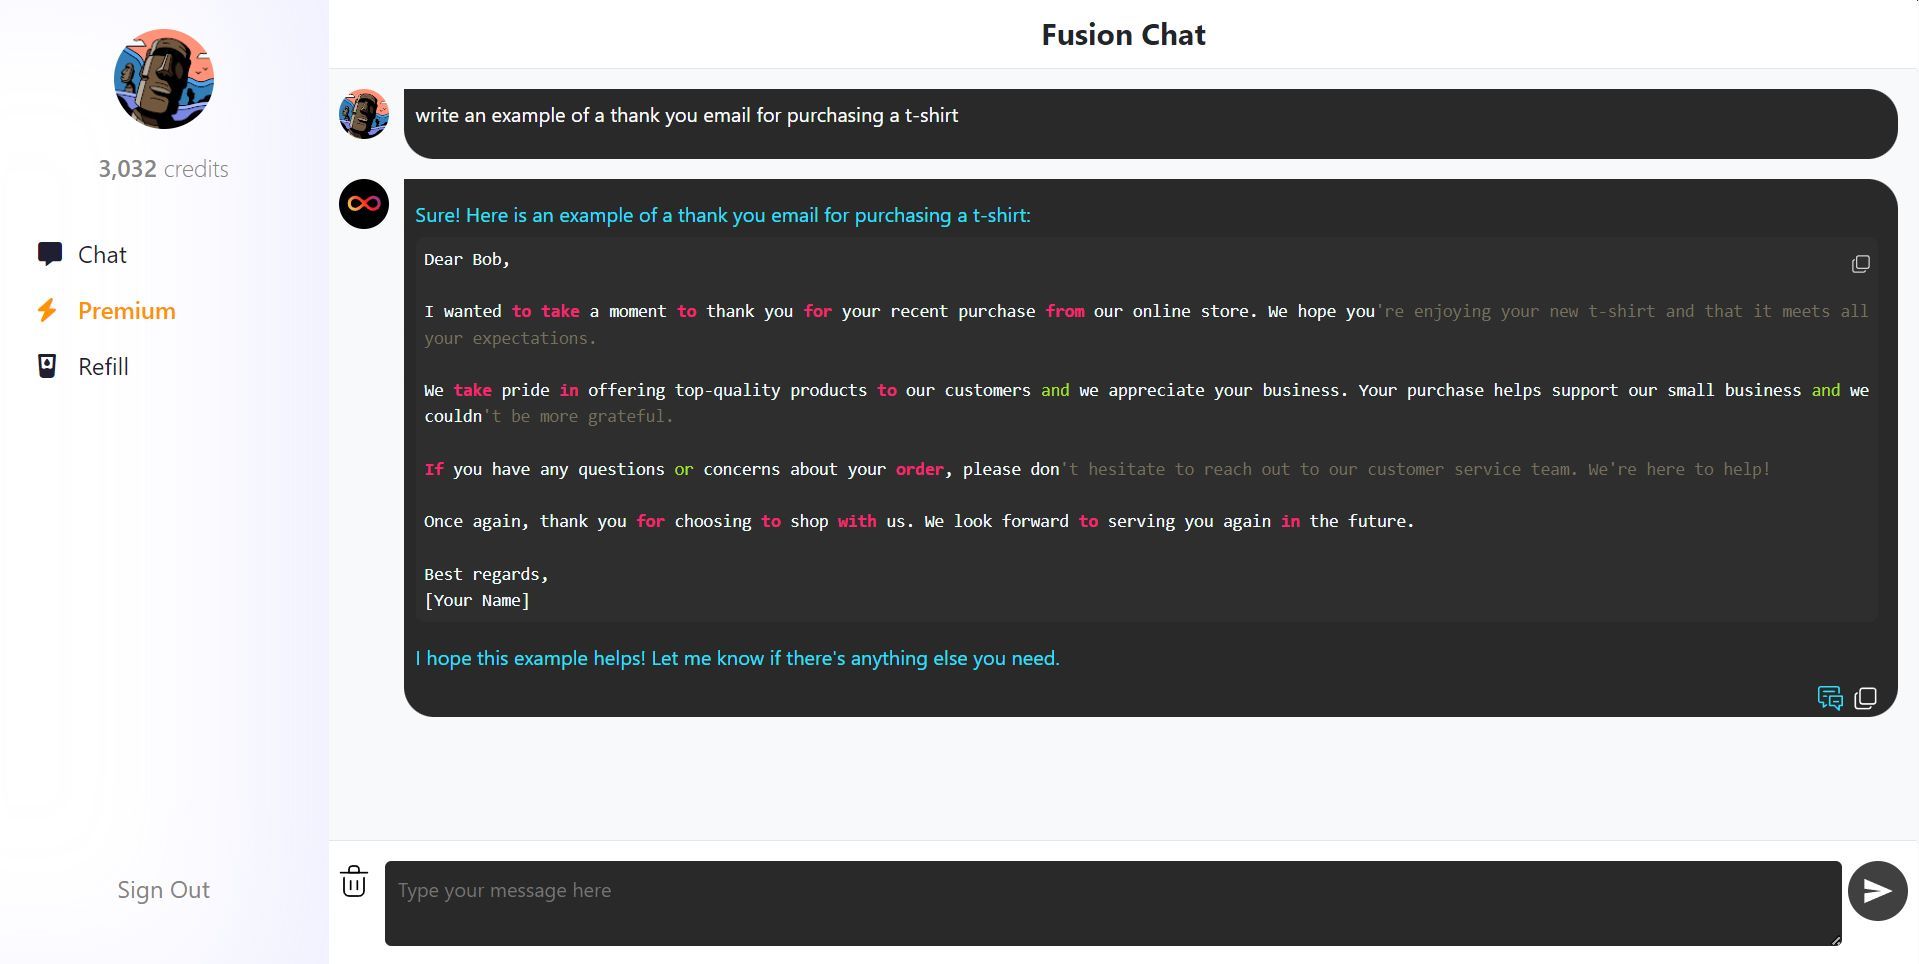 Fusion Chat - AI Chat Assistant